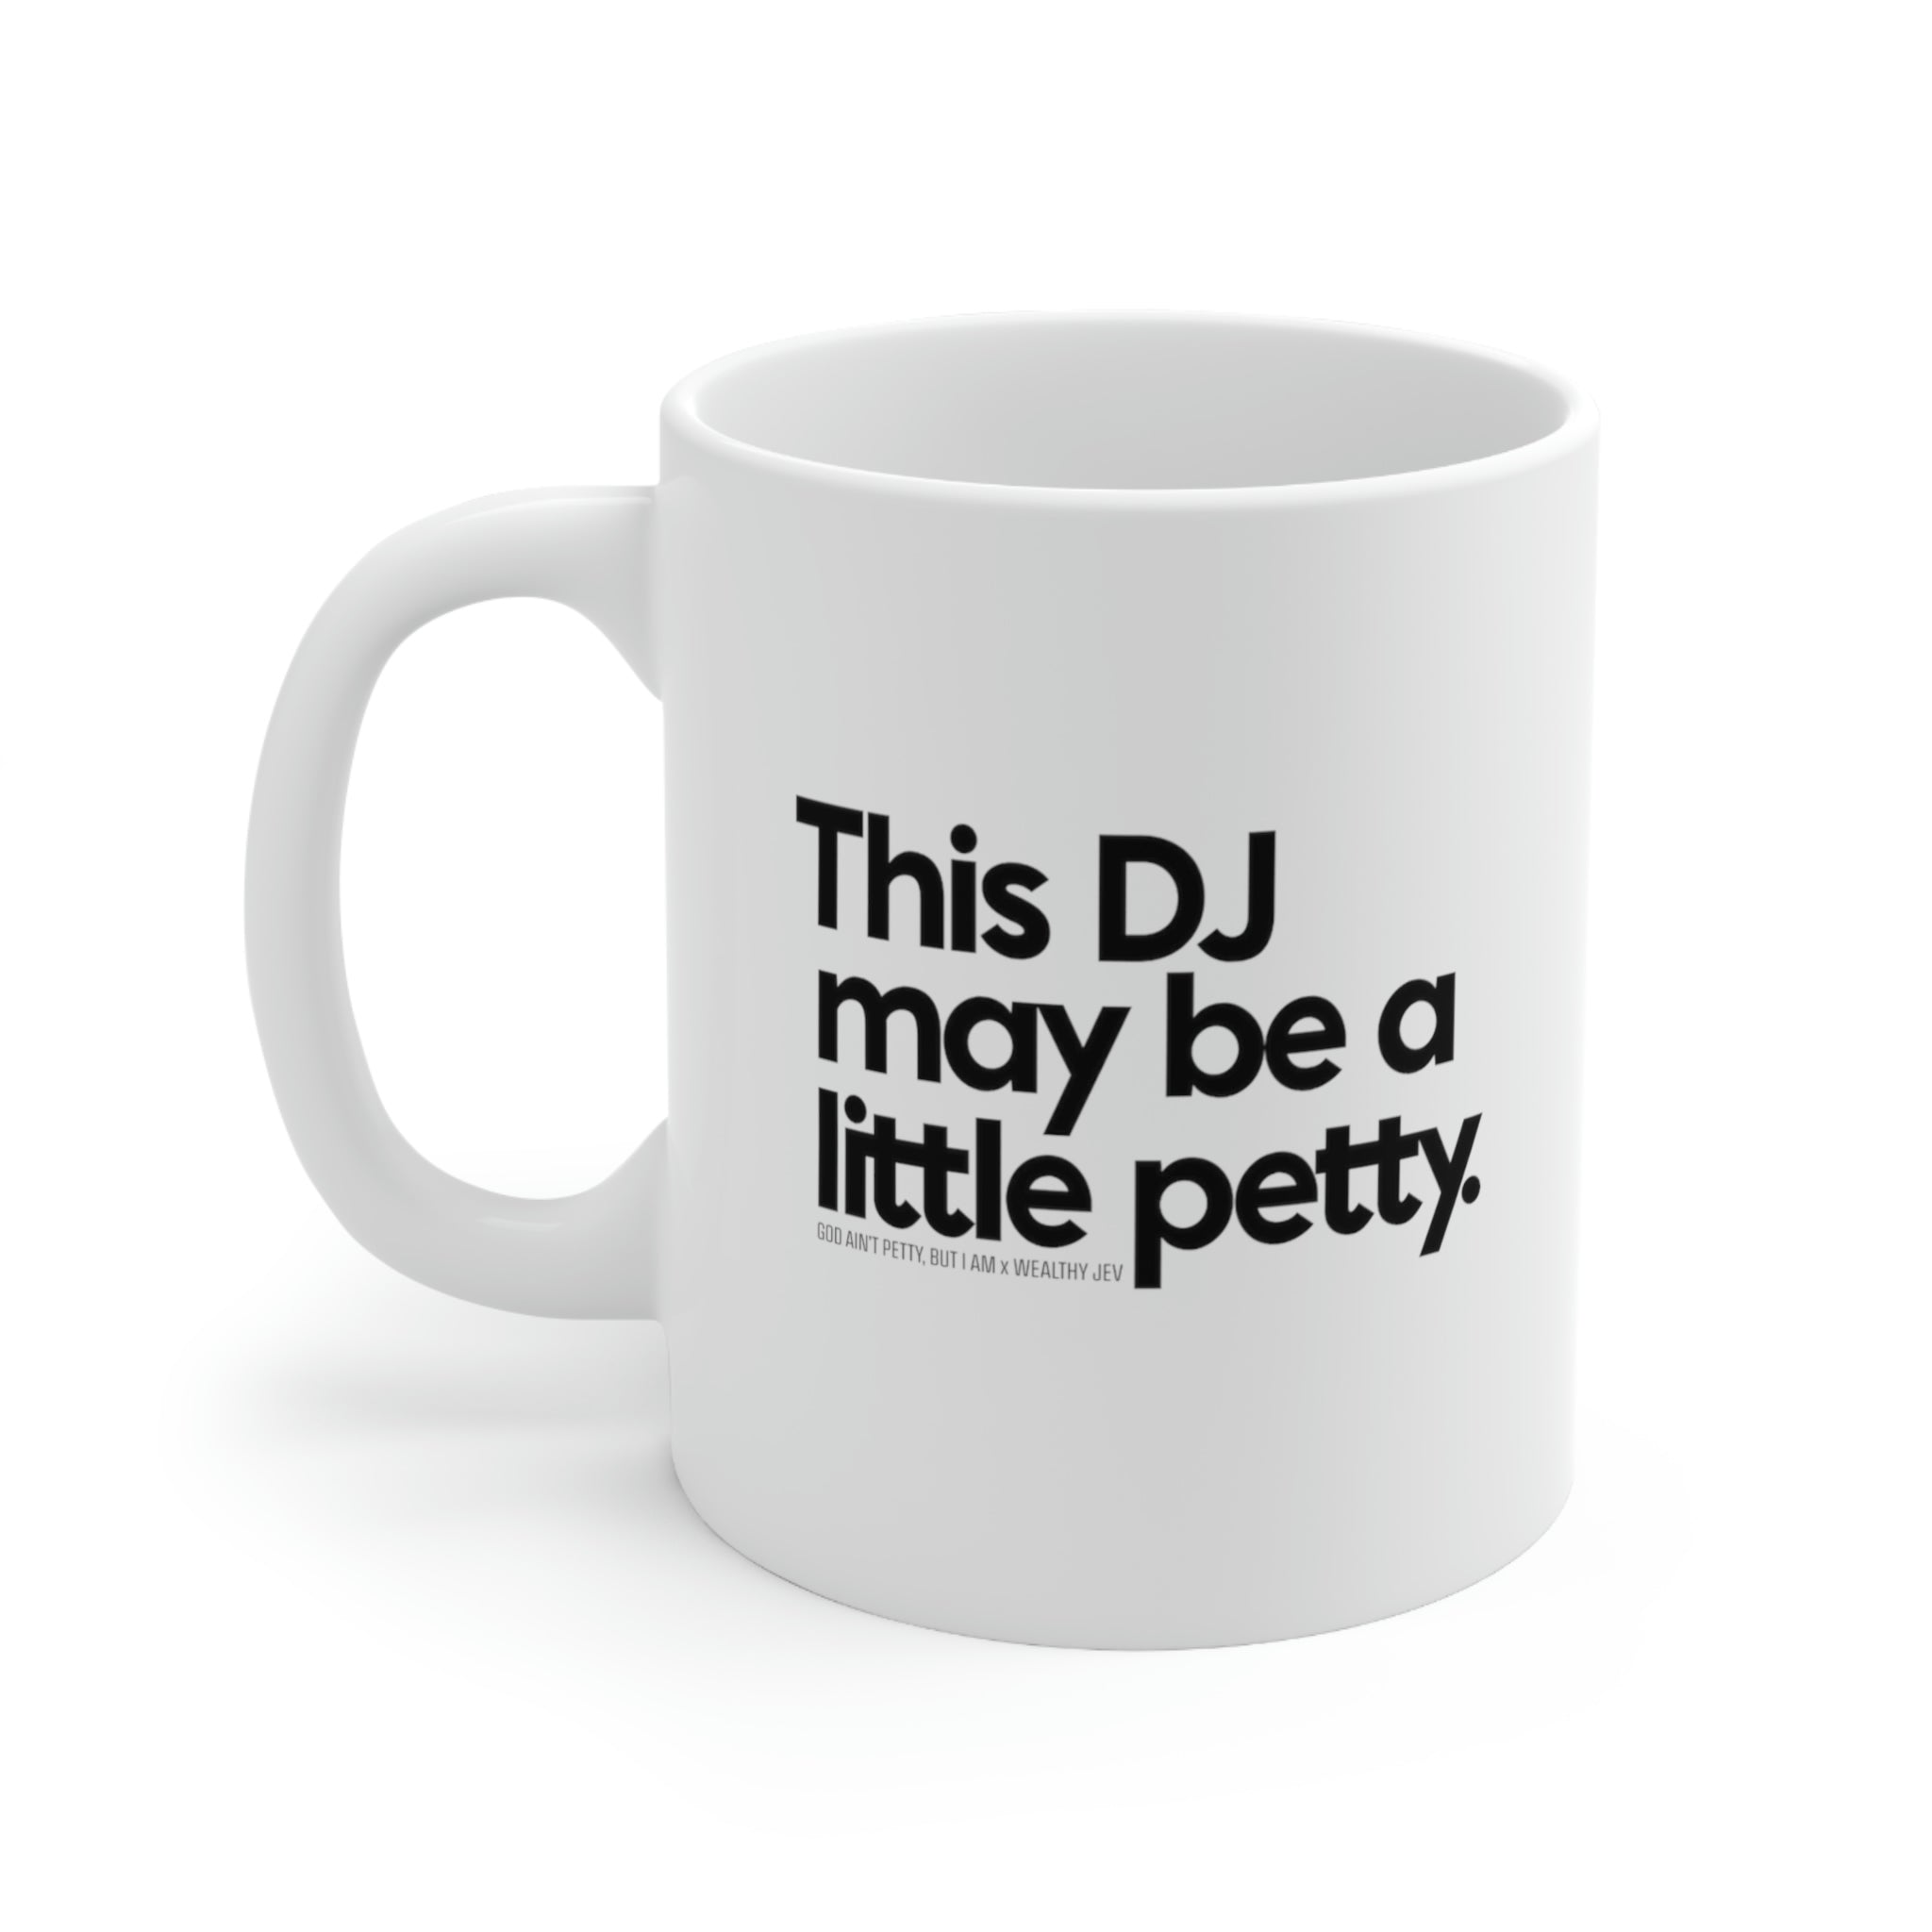 This DJ may be a little petty Mug11oz (White/Black) (God Ain't Petty, but I Am x Wealthy Jev Collab)-Mug-The Original God Ain't Petty But I Am